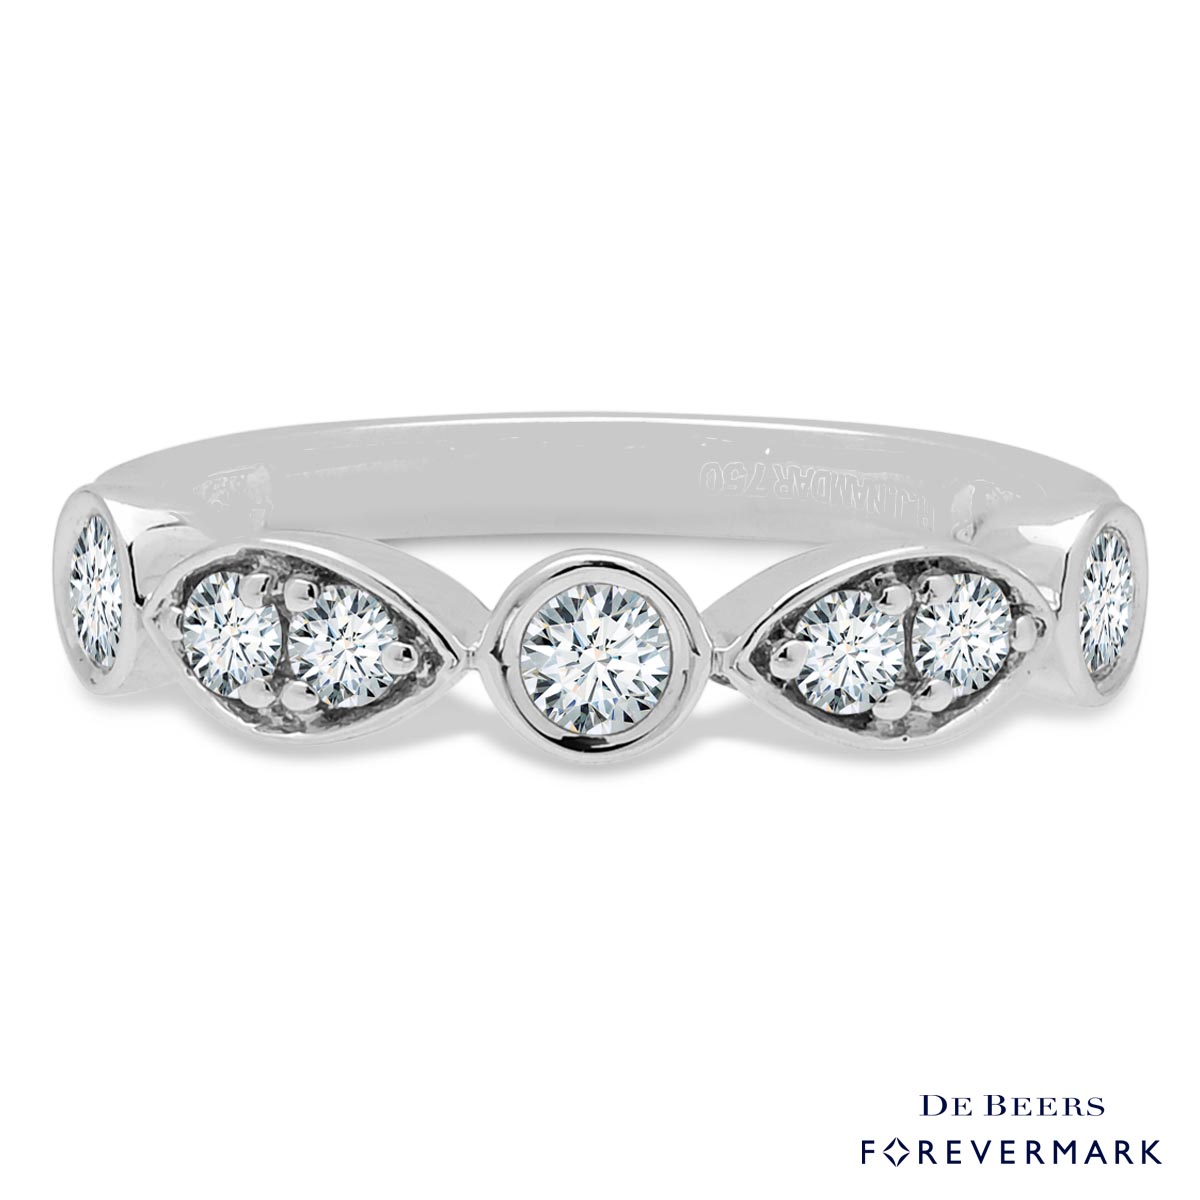 De Beers Forevermark Tribute Collection Diamond Ring in 18kt White Gold (1/2ct tw)